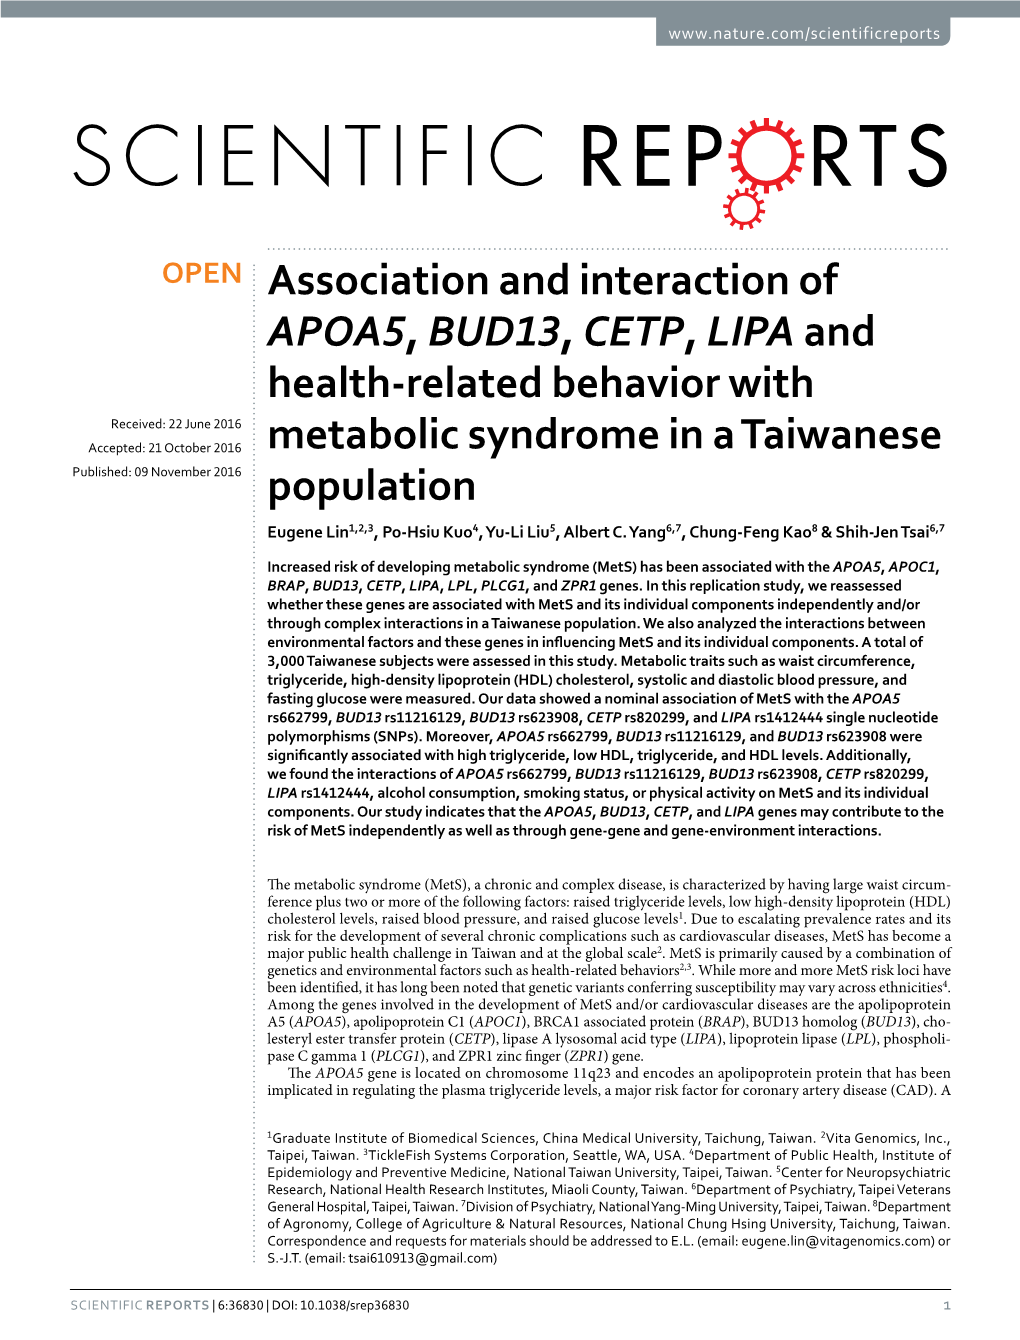 Association and Interaction of APOA5, BUD13, CETP, Lipaand Health